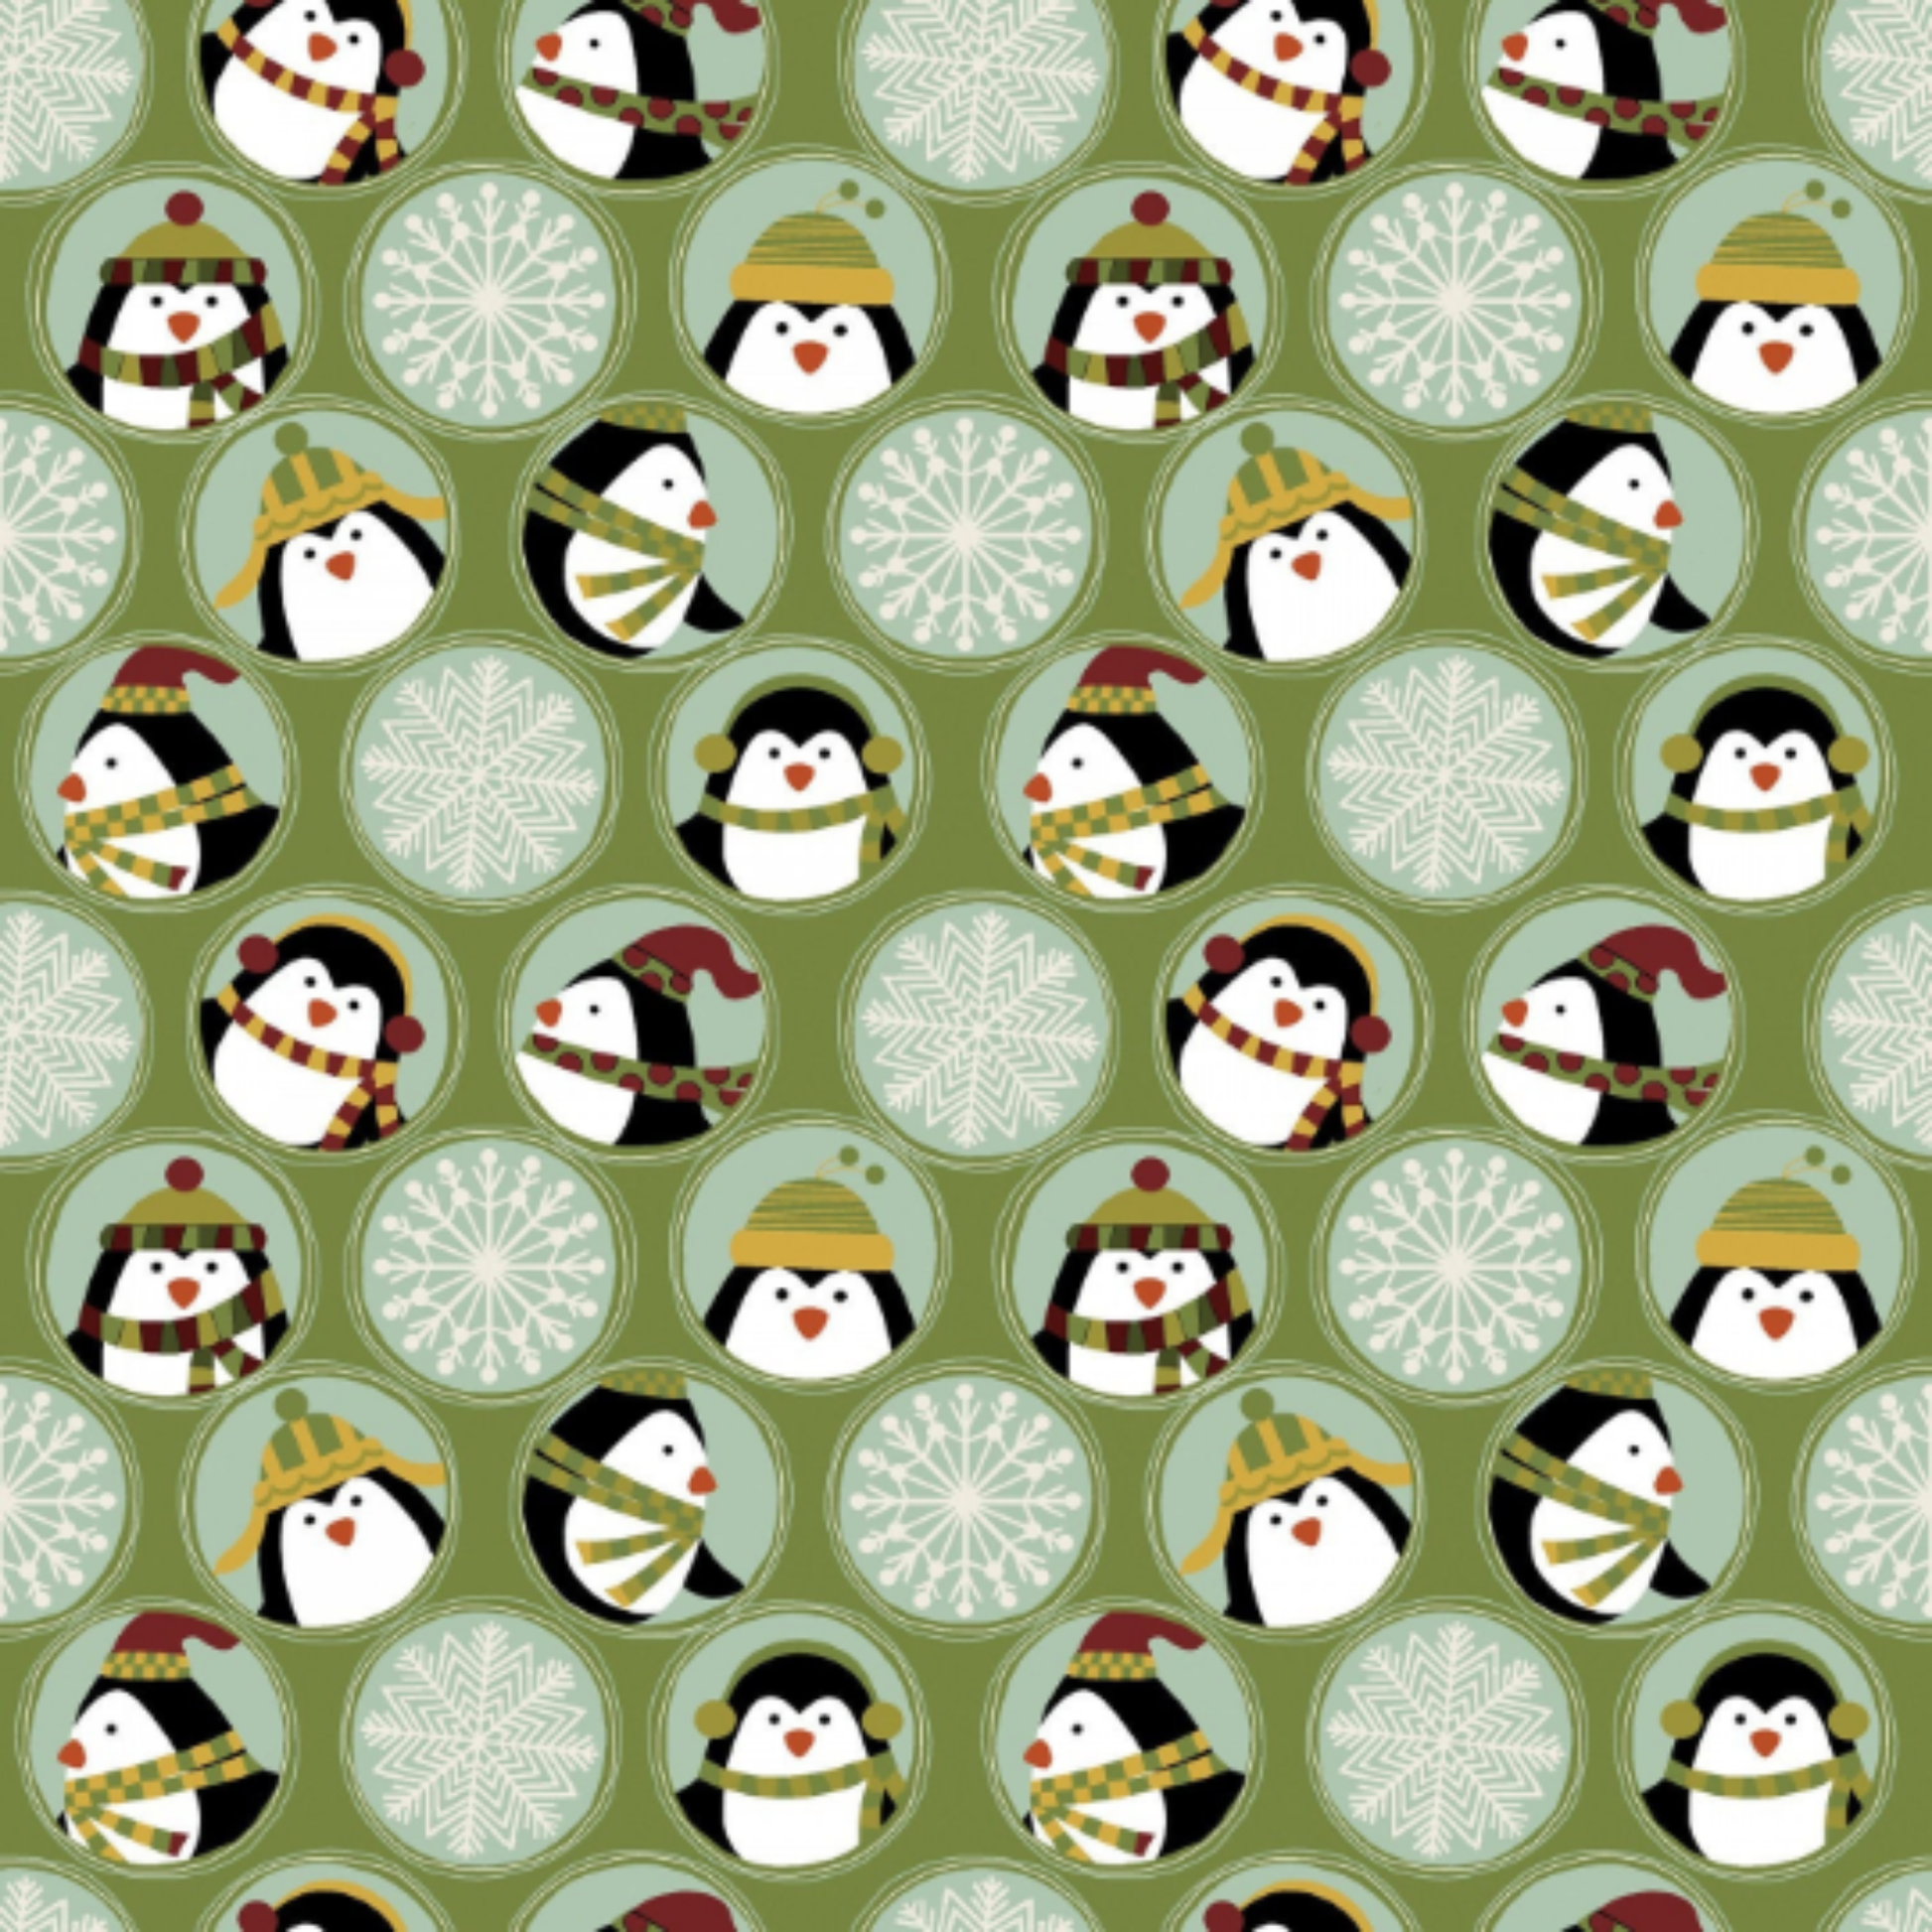 Angels Neverland Fabric 1 yard Penguins Green Jolly Penguin Fabric Bundle with coordinating fabrics also Sold By The Yard